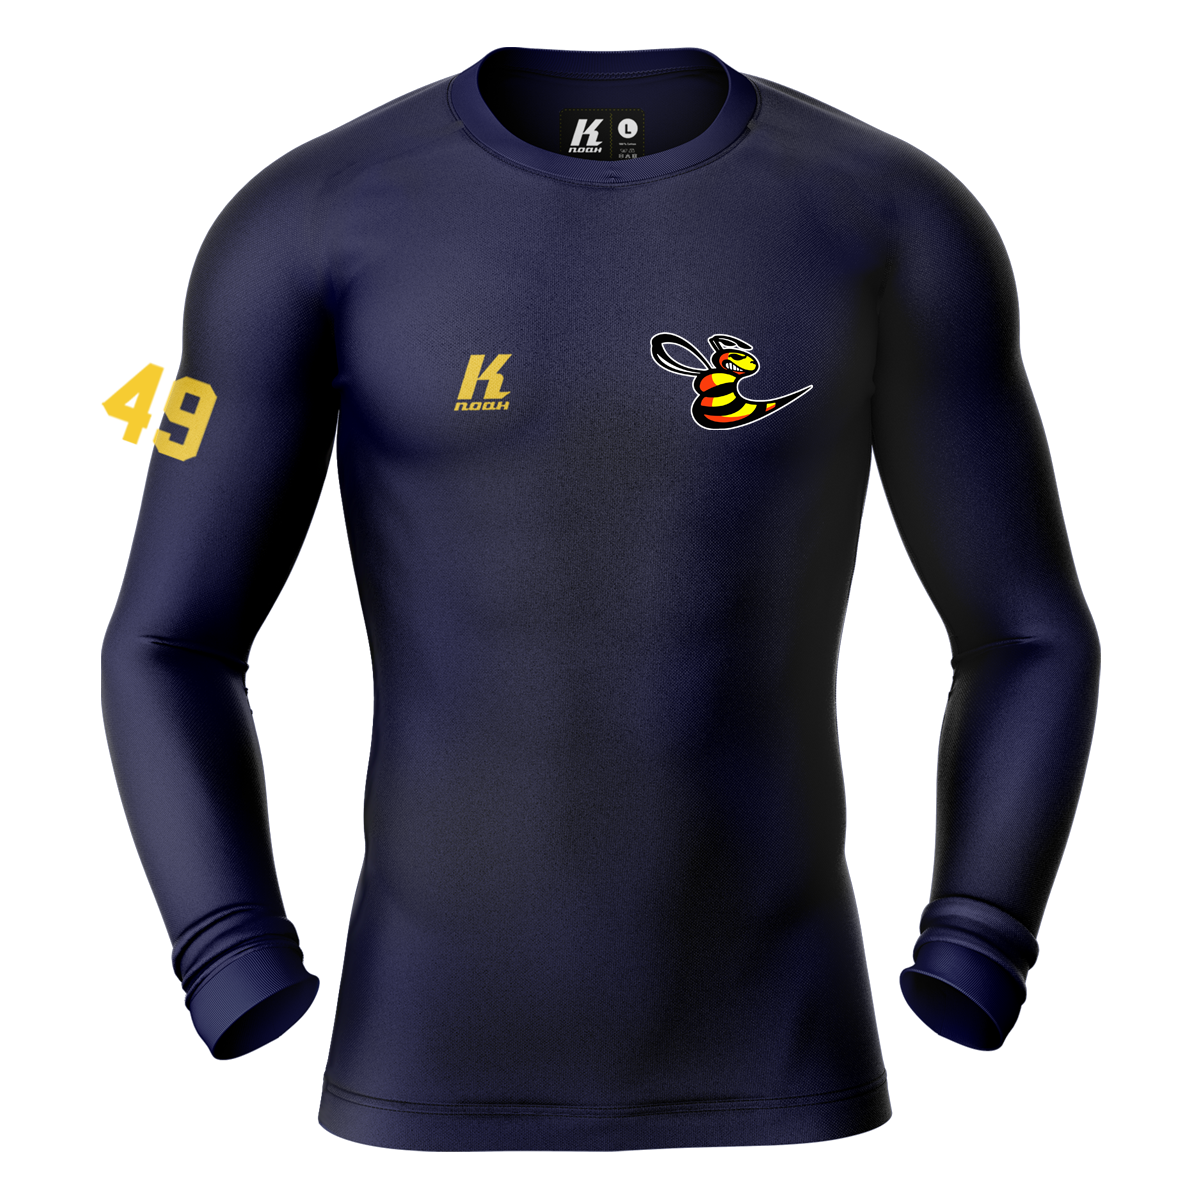 Hornets K.Tech Compression Longsleeve Shirt navy with Playernumber/Initials